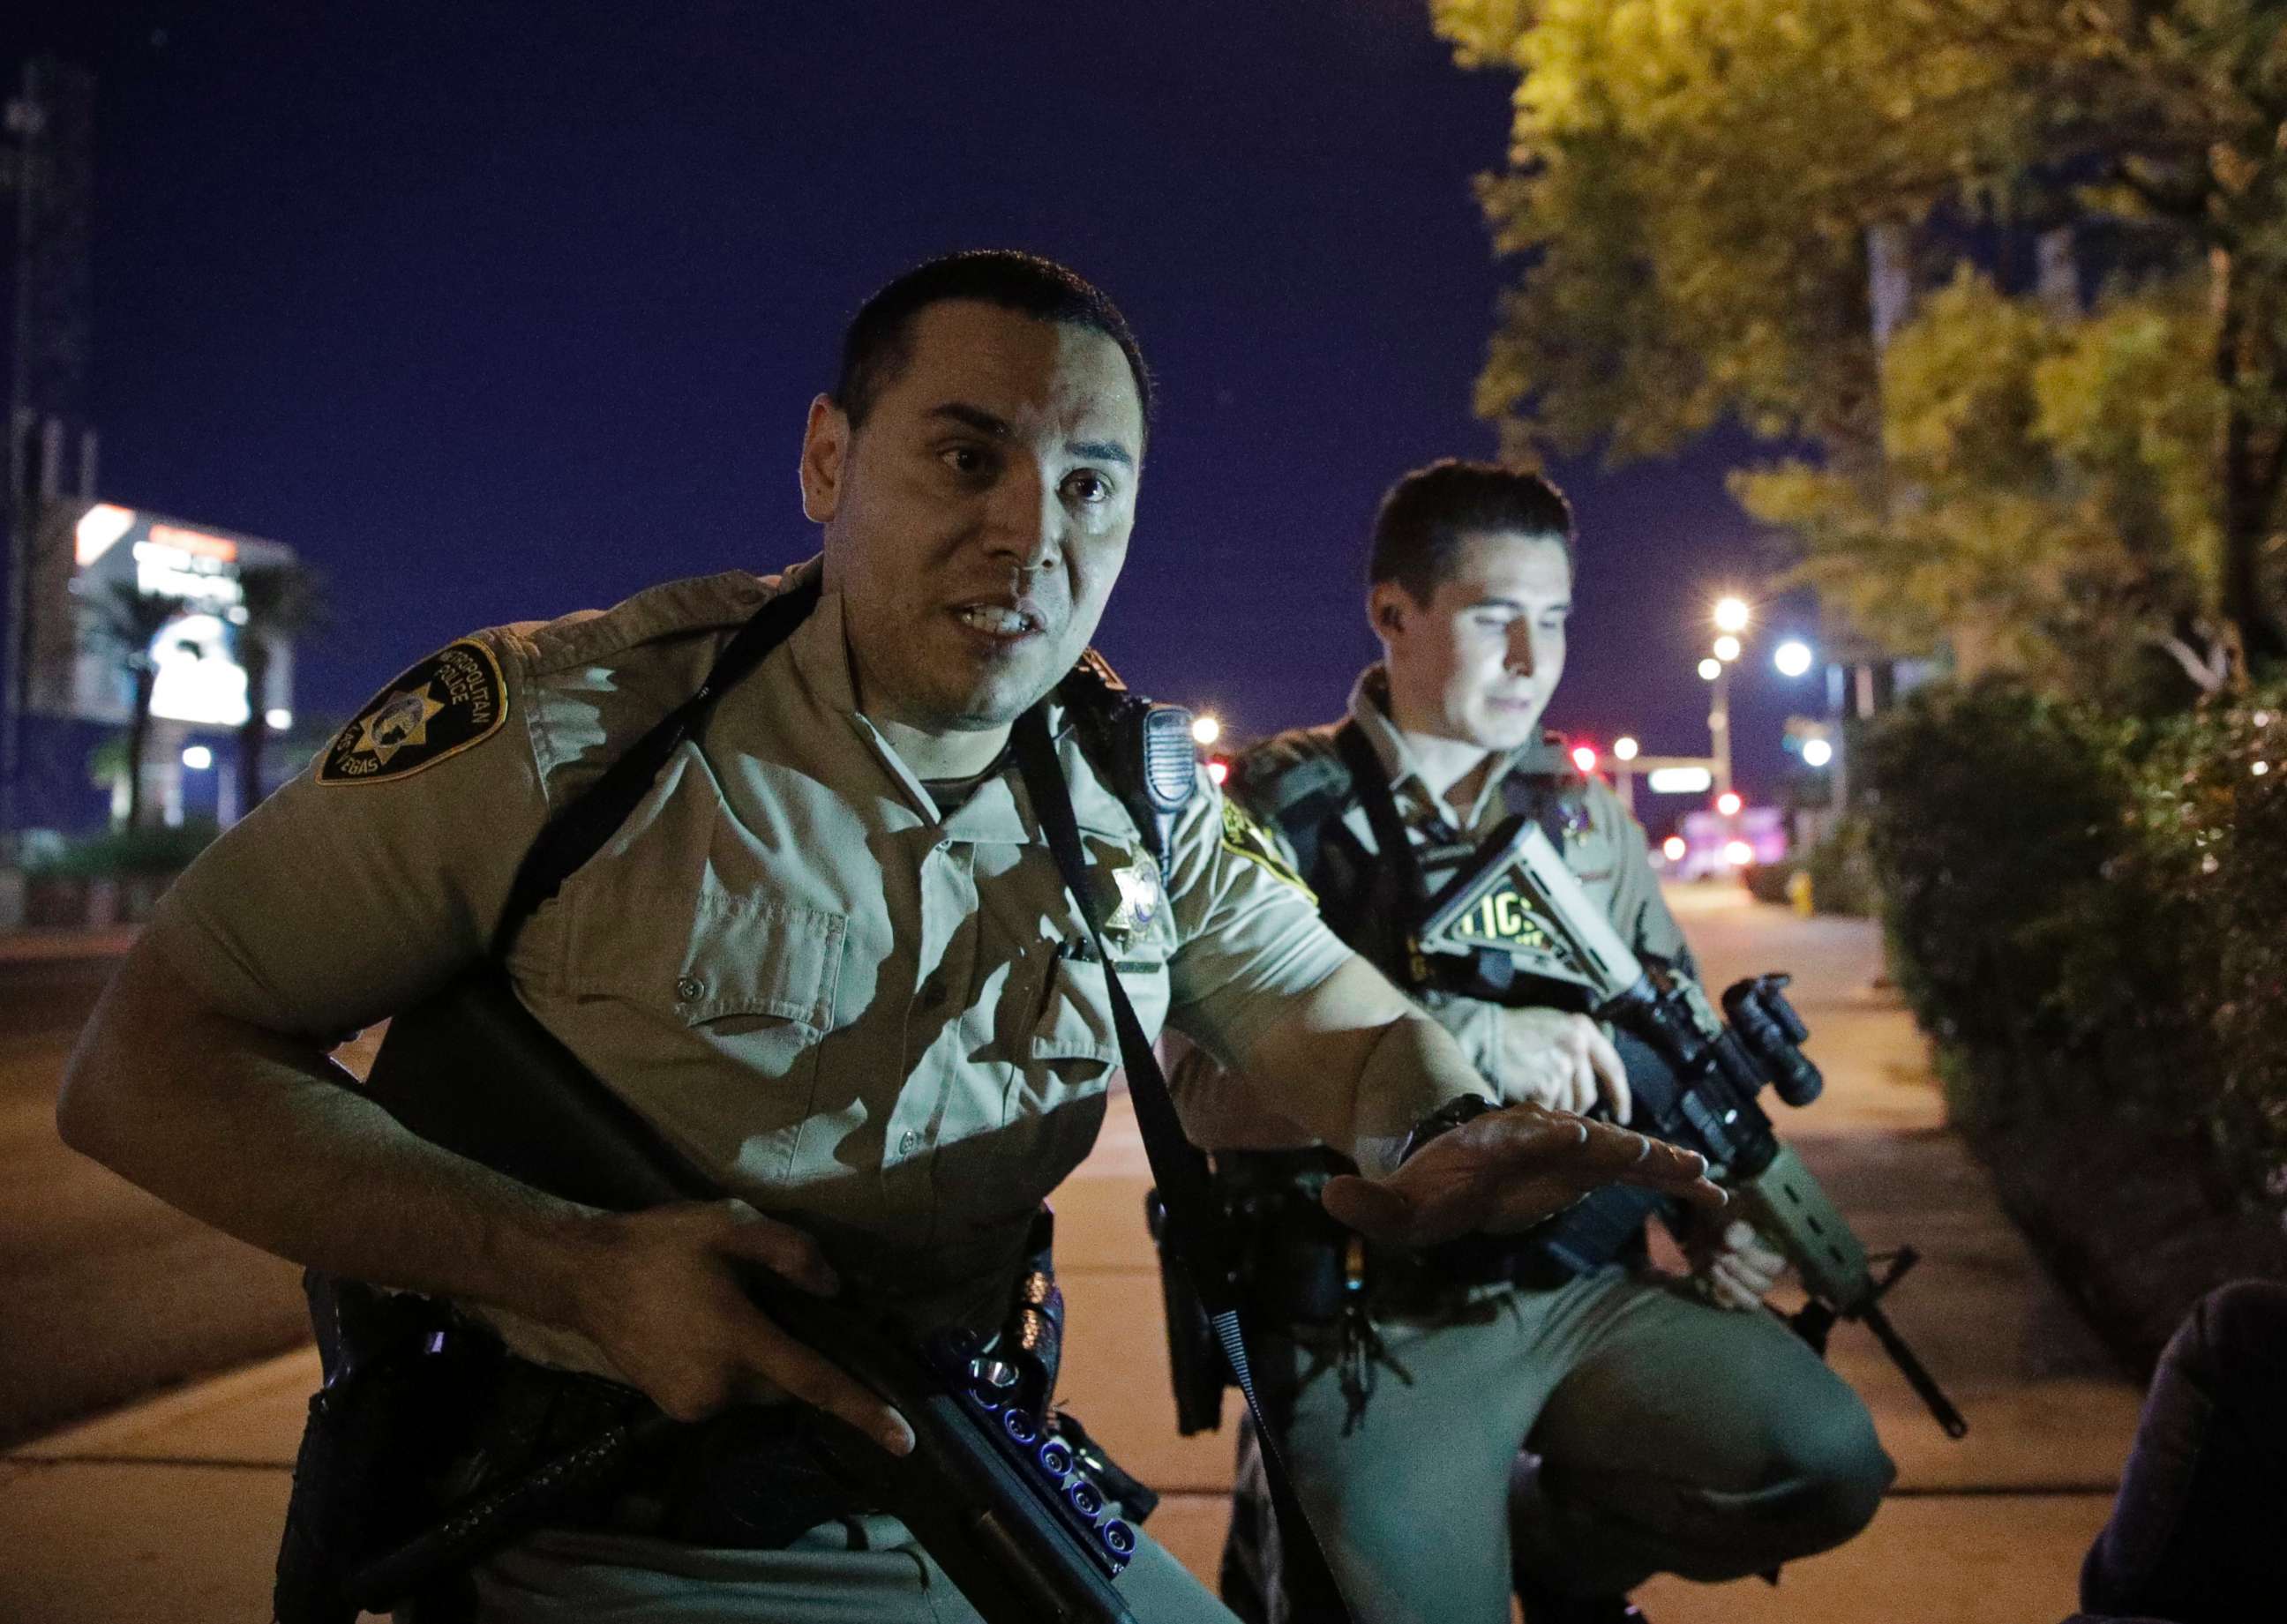 PHOTO: Police officers advise people to take cover near the scene of a shooting near the Mandalay Bay resort and casino on the Las Vegas Strip in Las Vegas, Oct. 1, 2017.